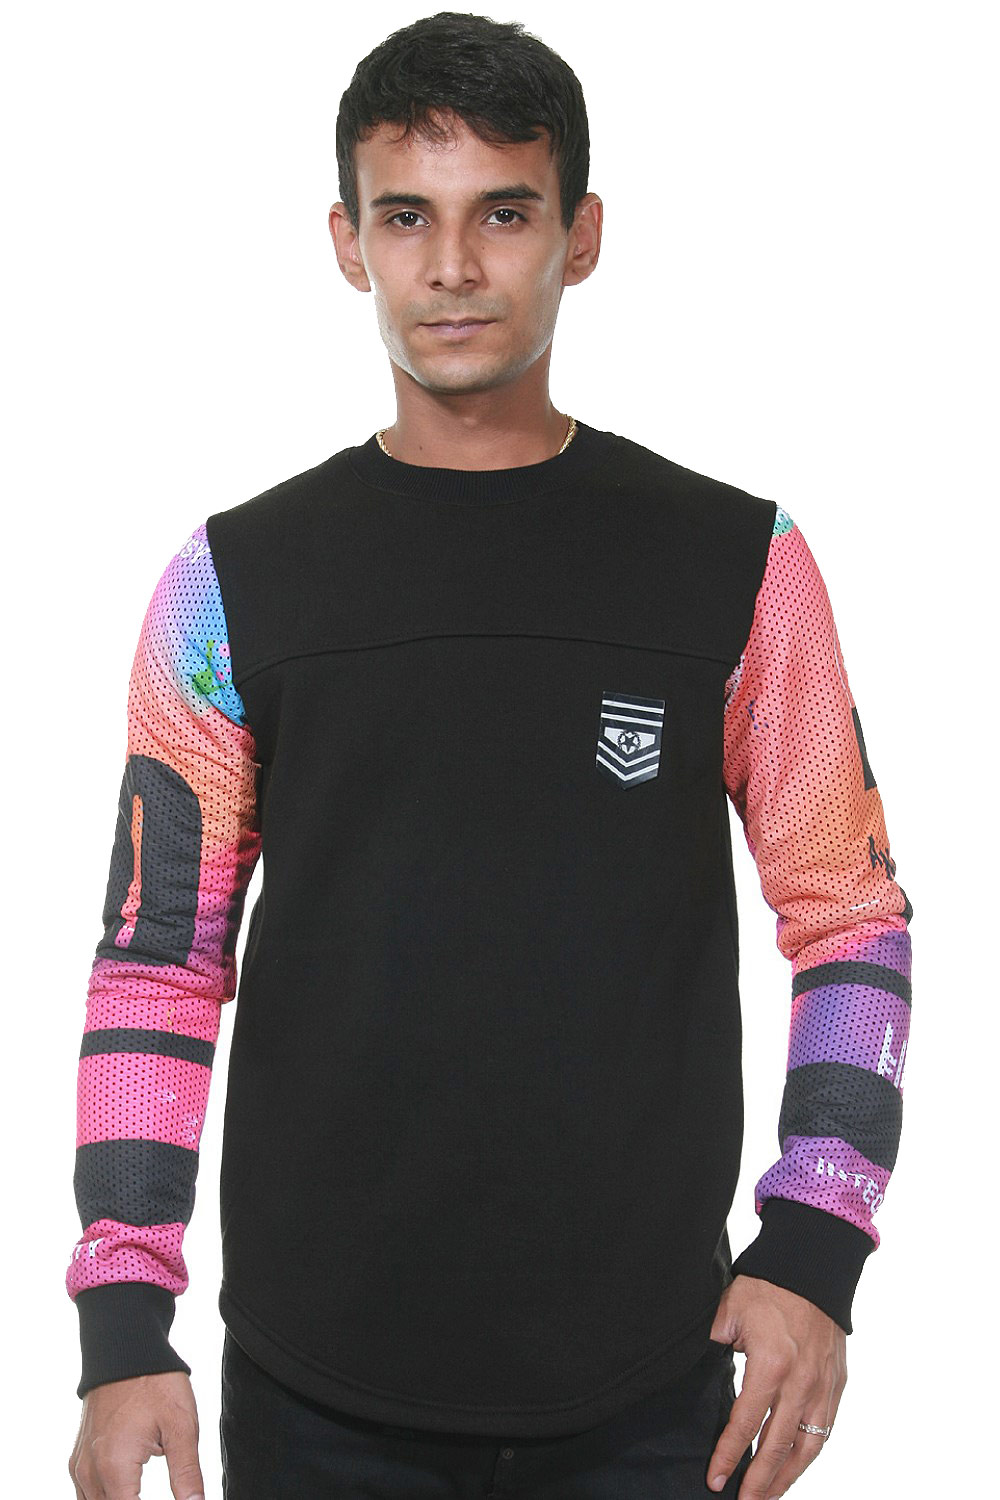 BY STUDIO sweater at oboy.com